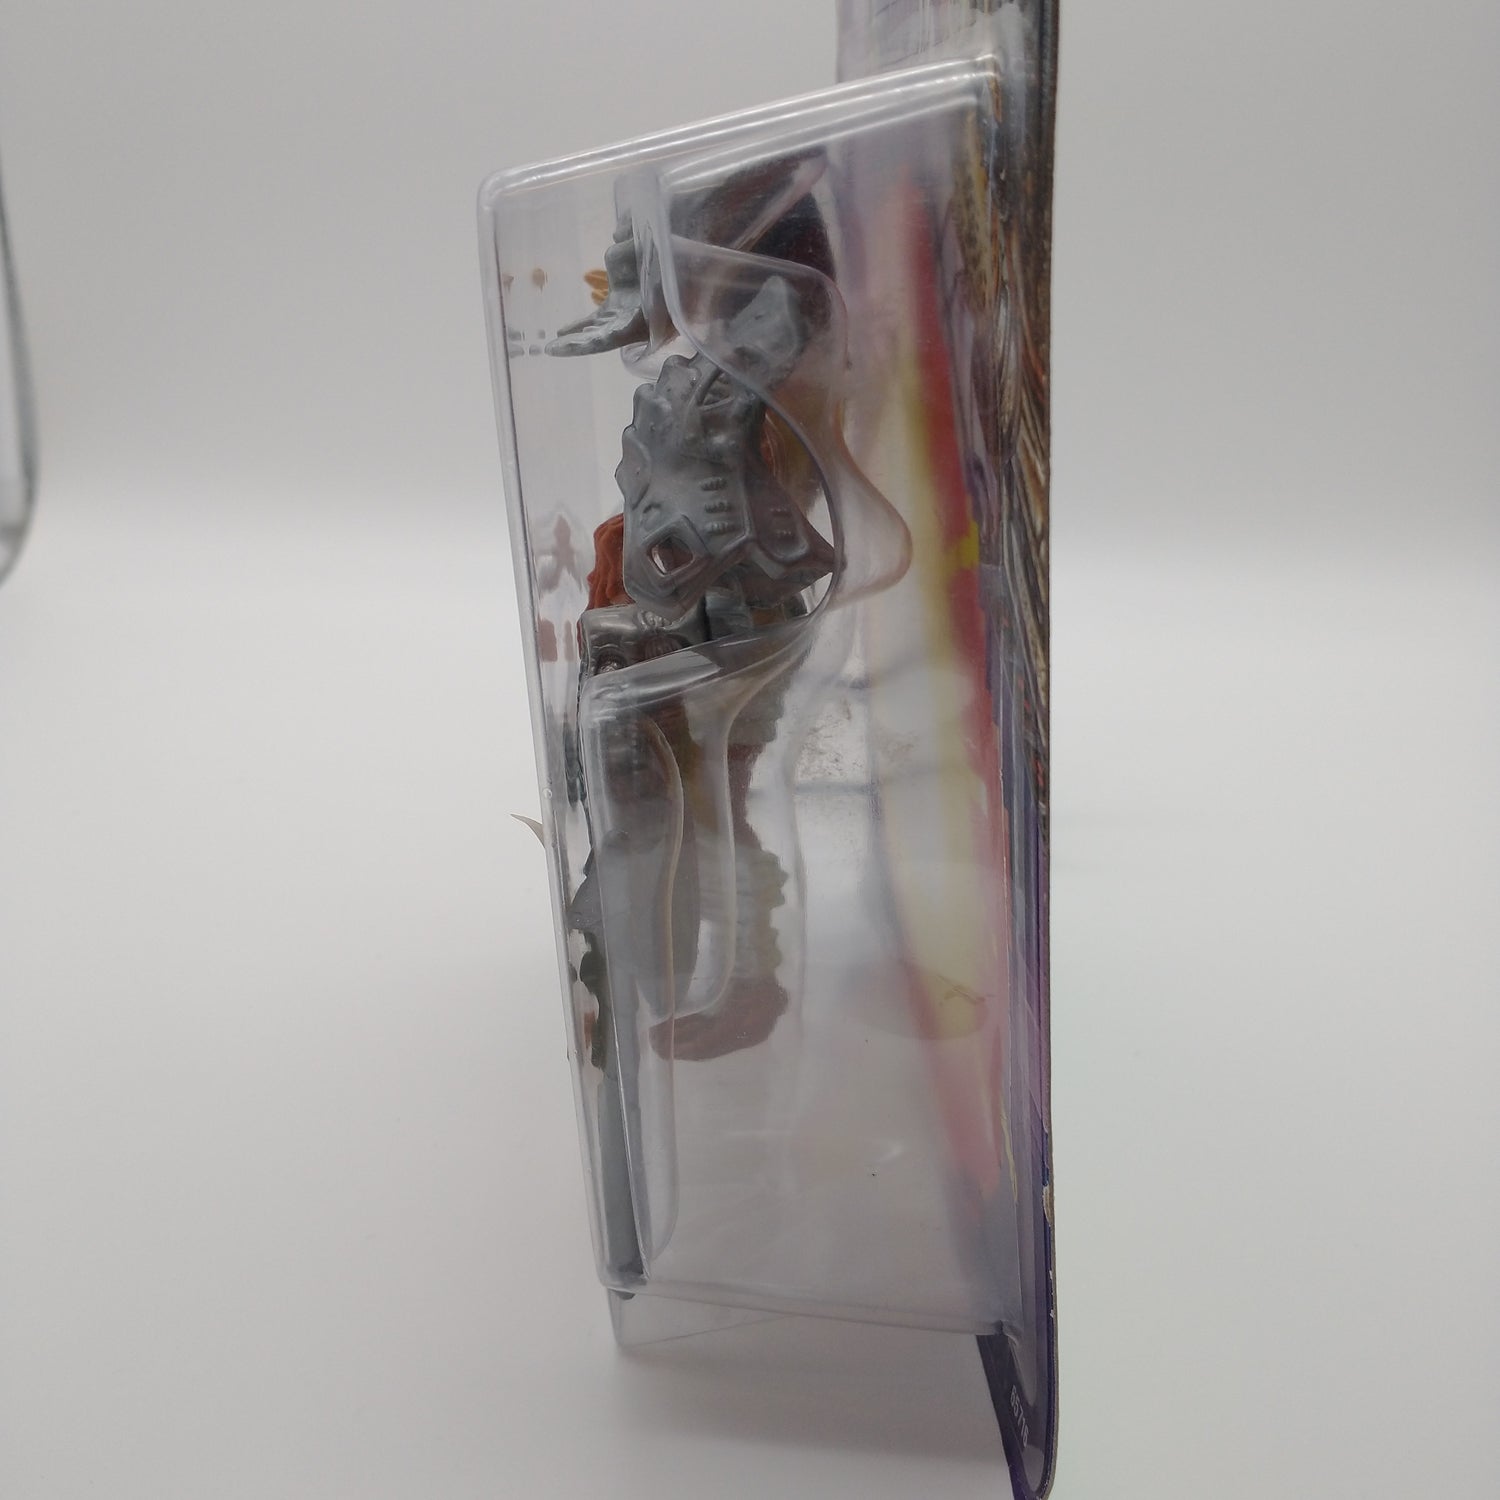 A picture of the right side of the cart and bubble. The action figure is inside.